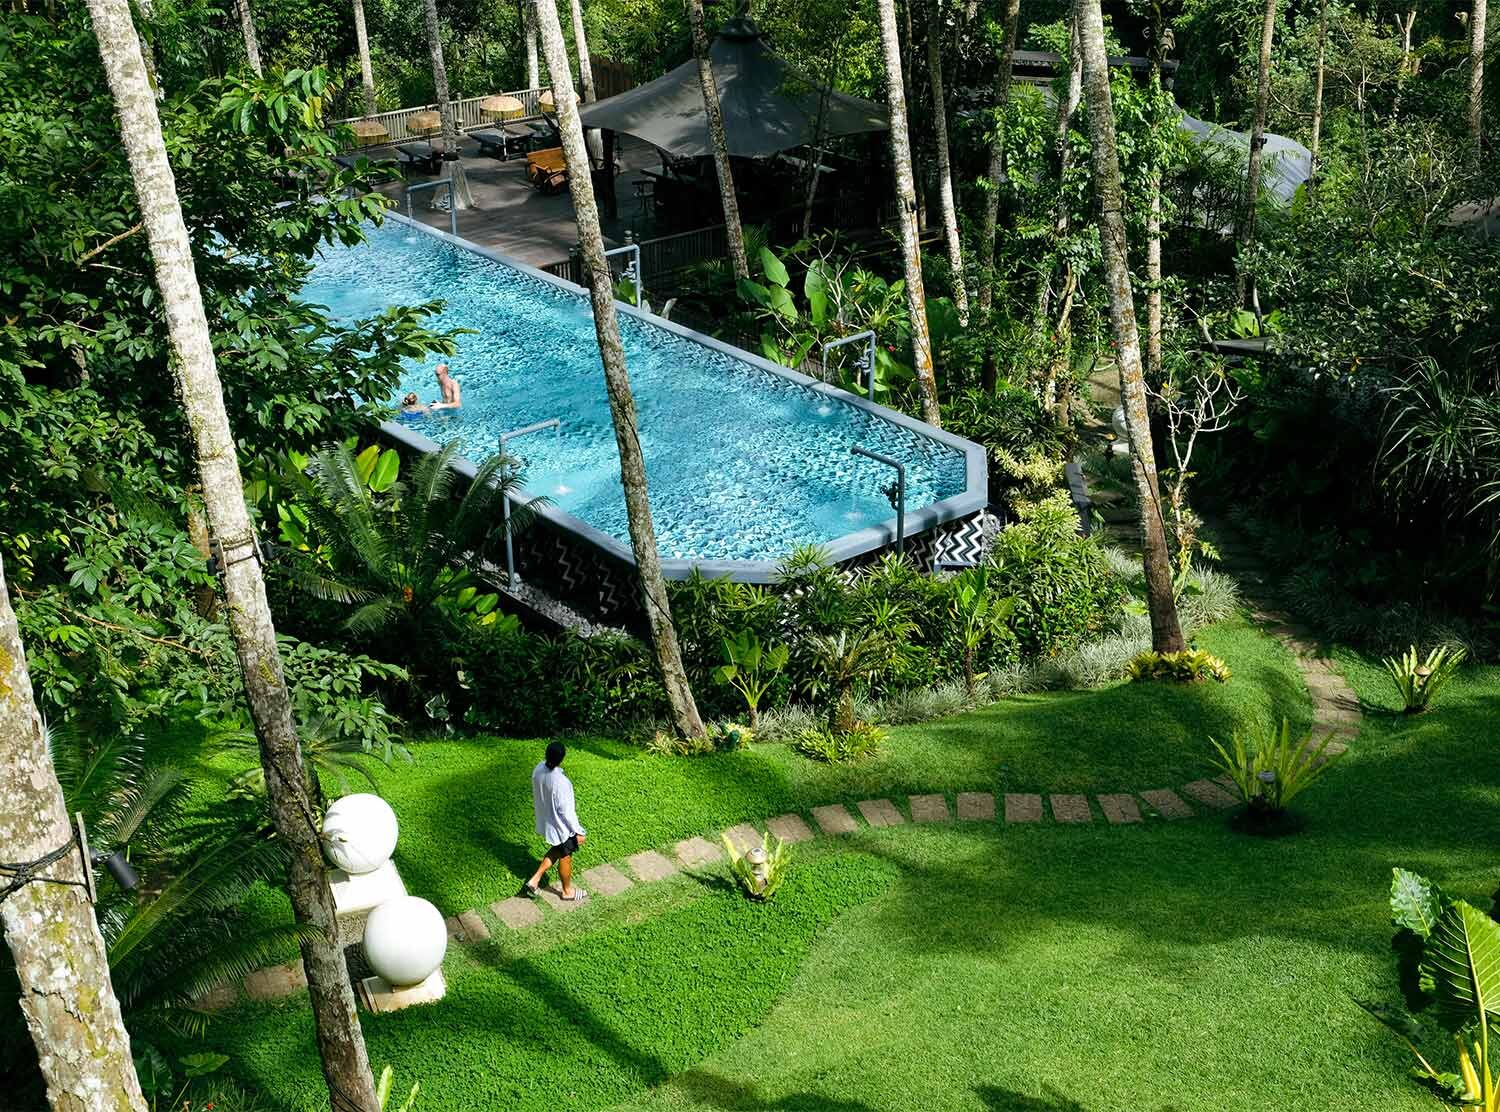 Capella Ubud The property is situated on a hill, making it a wonder to explore. Here Dougy passes the main pool, sundeck, and the pool bar. How divine is the zigzagged bottom of that pool!